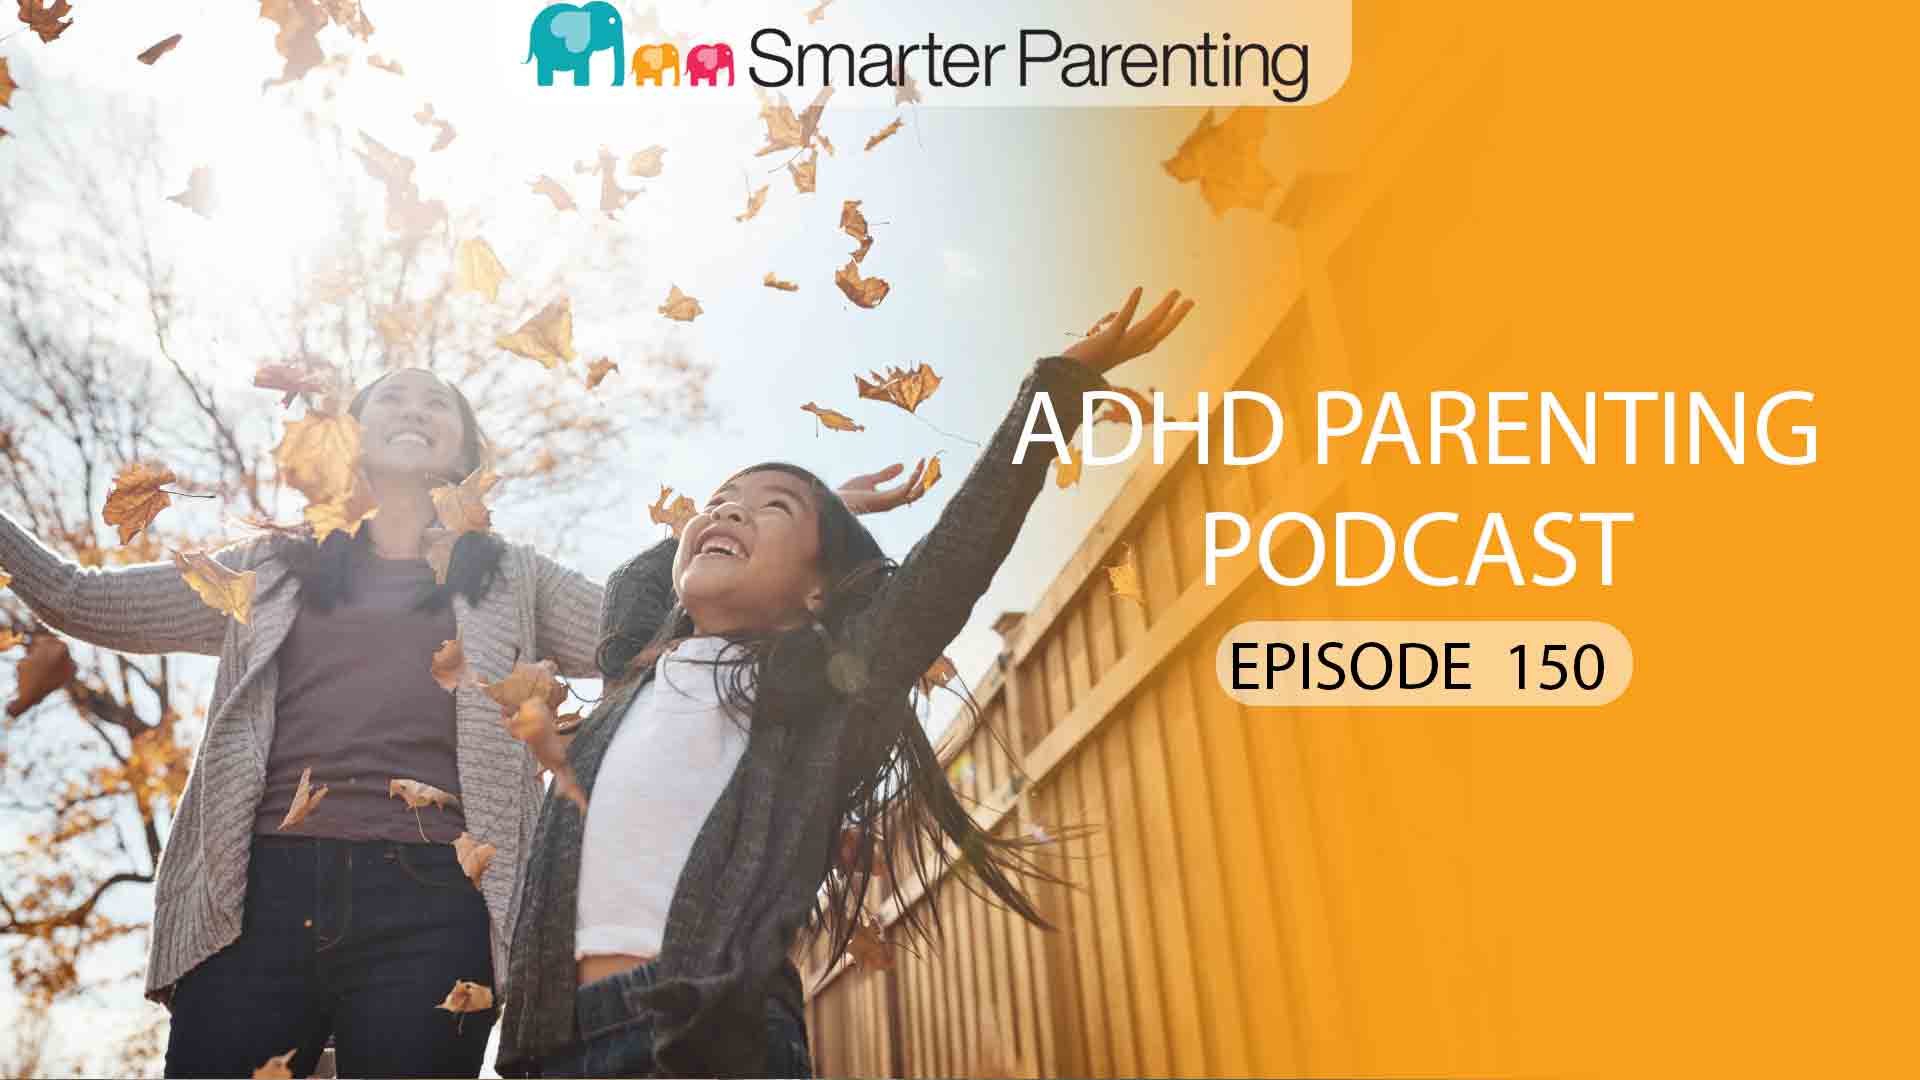 Finding common ground in coparenting